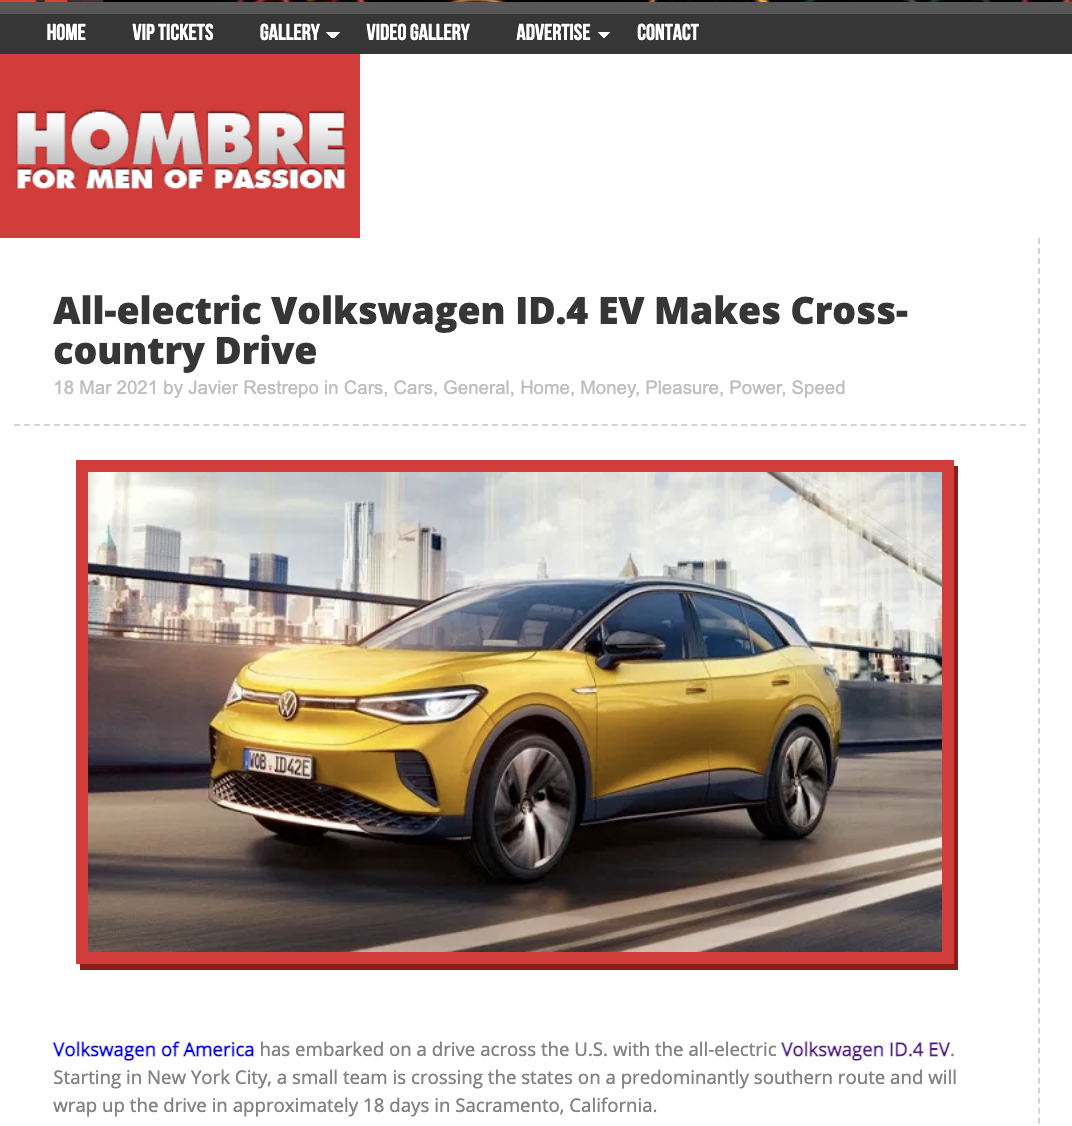 All-electric Volkswagen ID.4 EV Makes Cross-country Drive